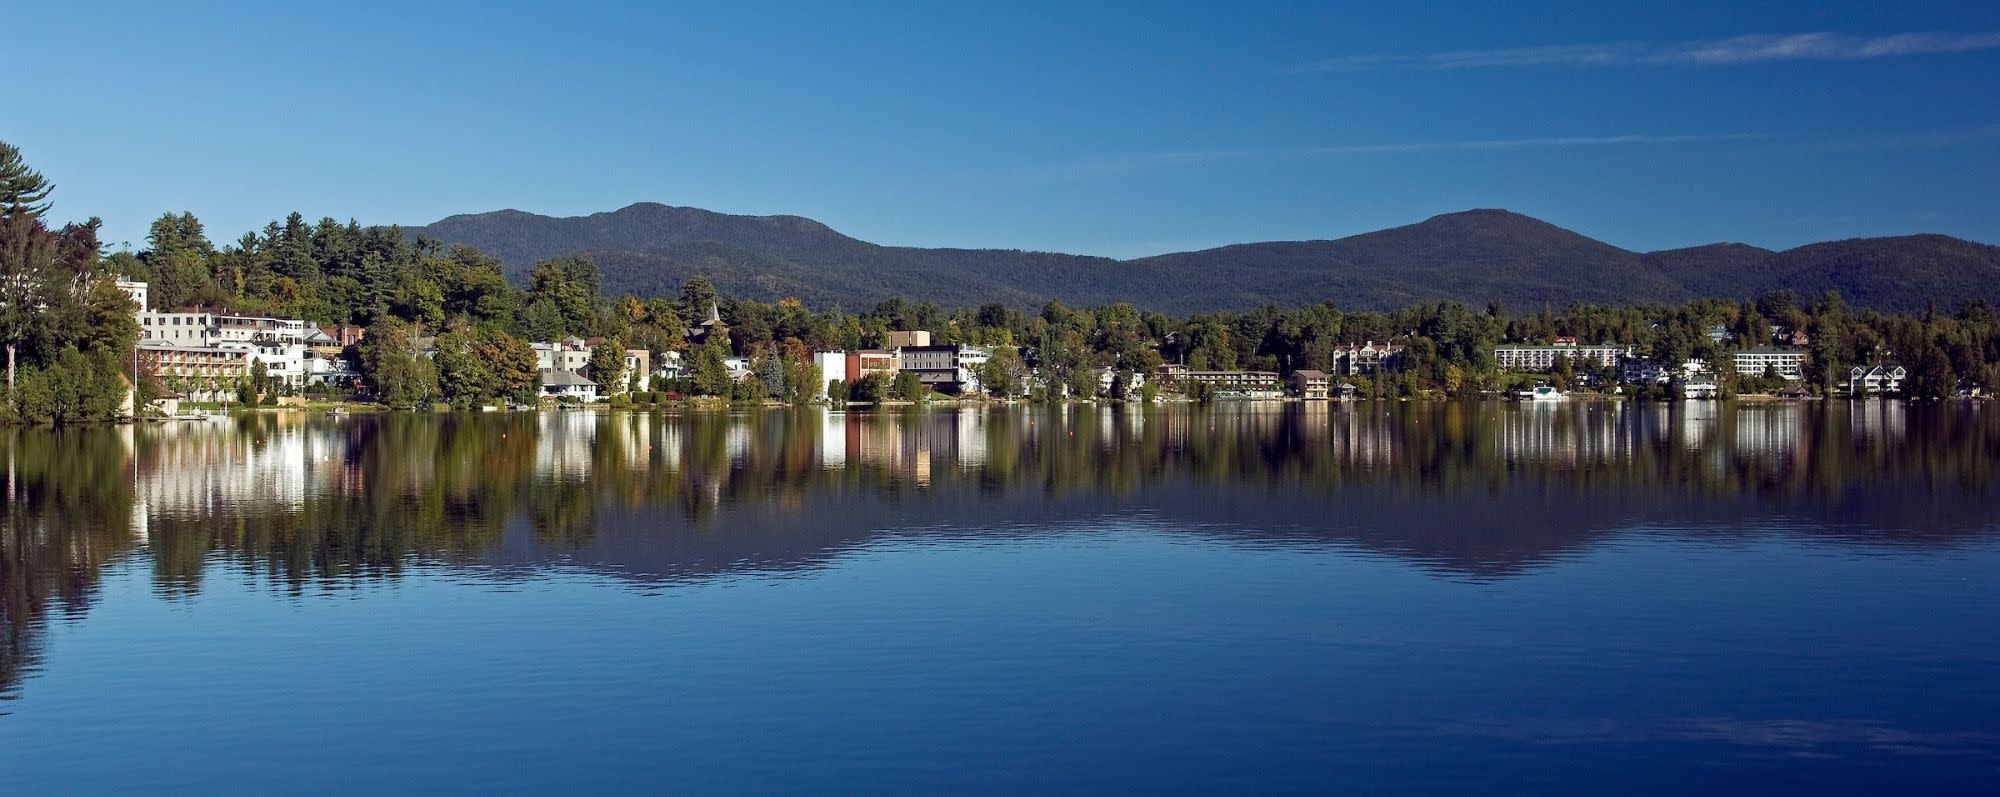 A view of Lake Placid from across a lake